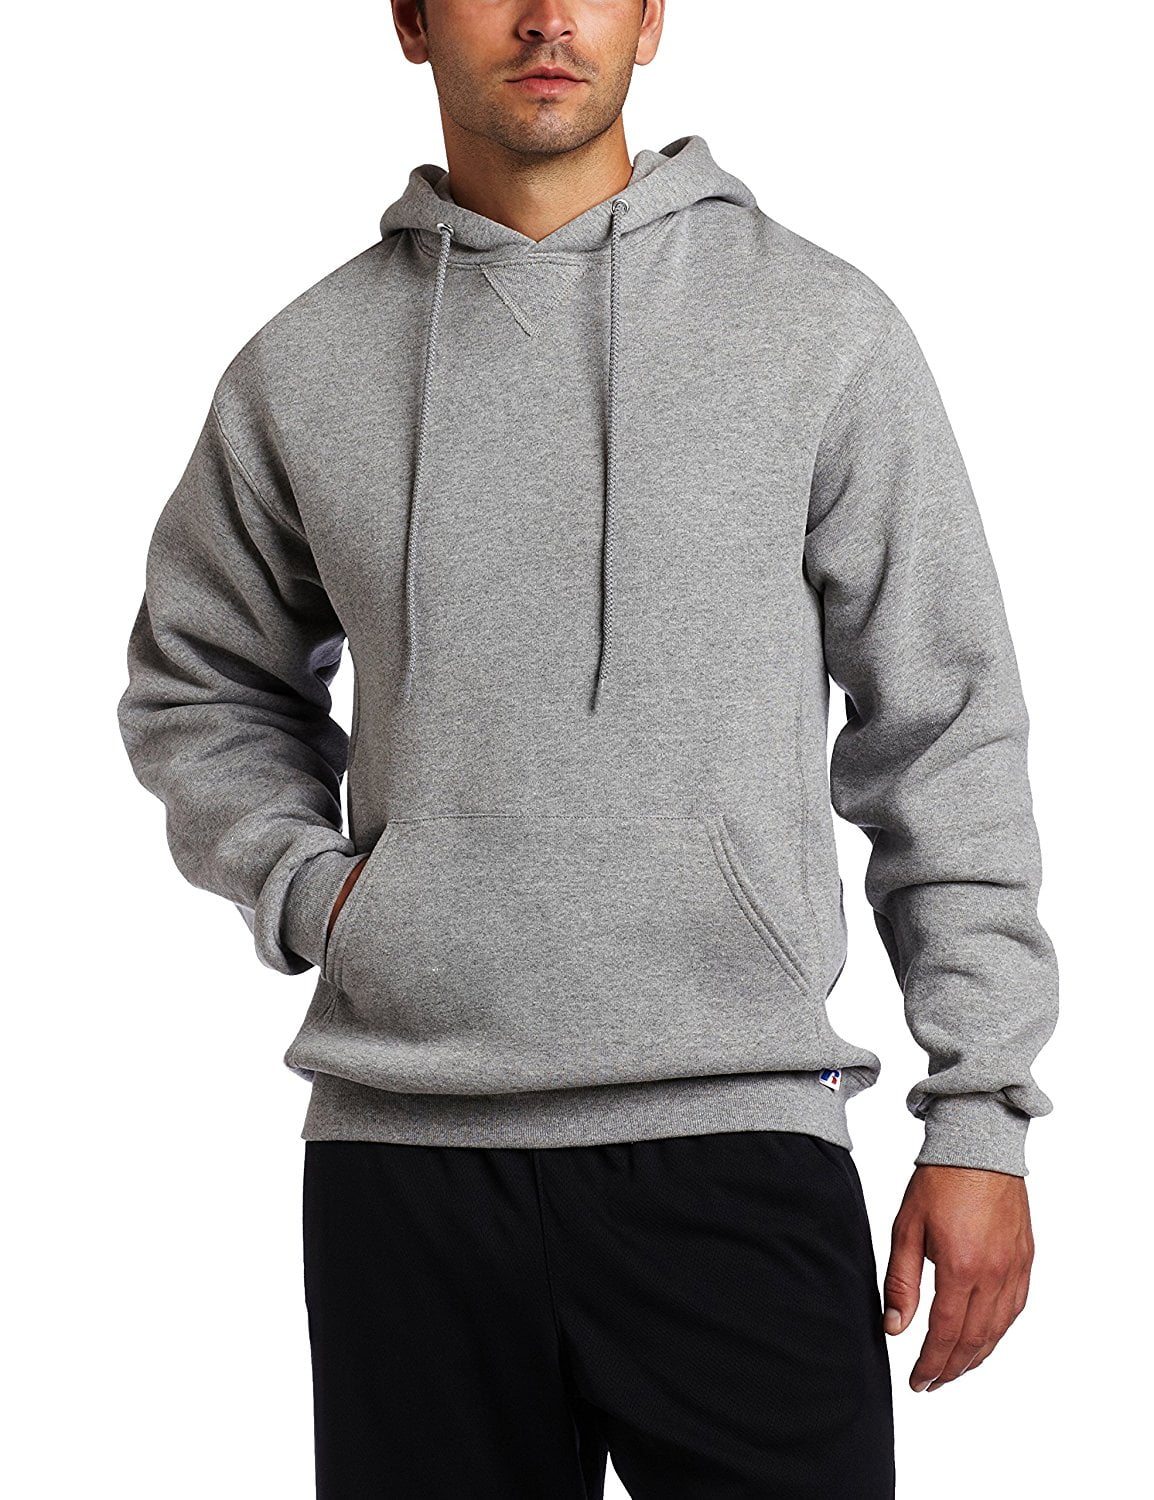 Russell Athletic - Russell Athletic - Men's Dri Power Hooded Pullover ...